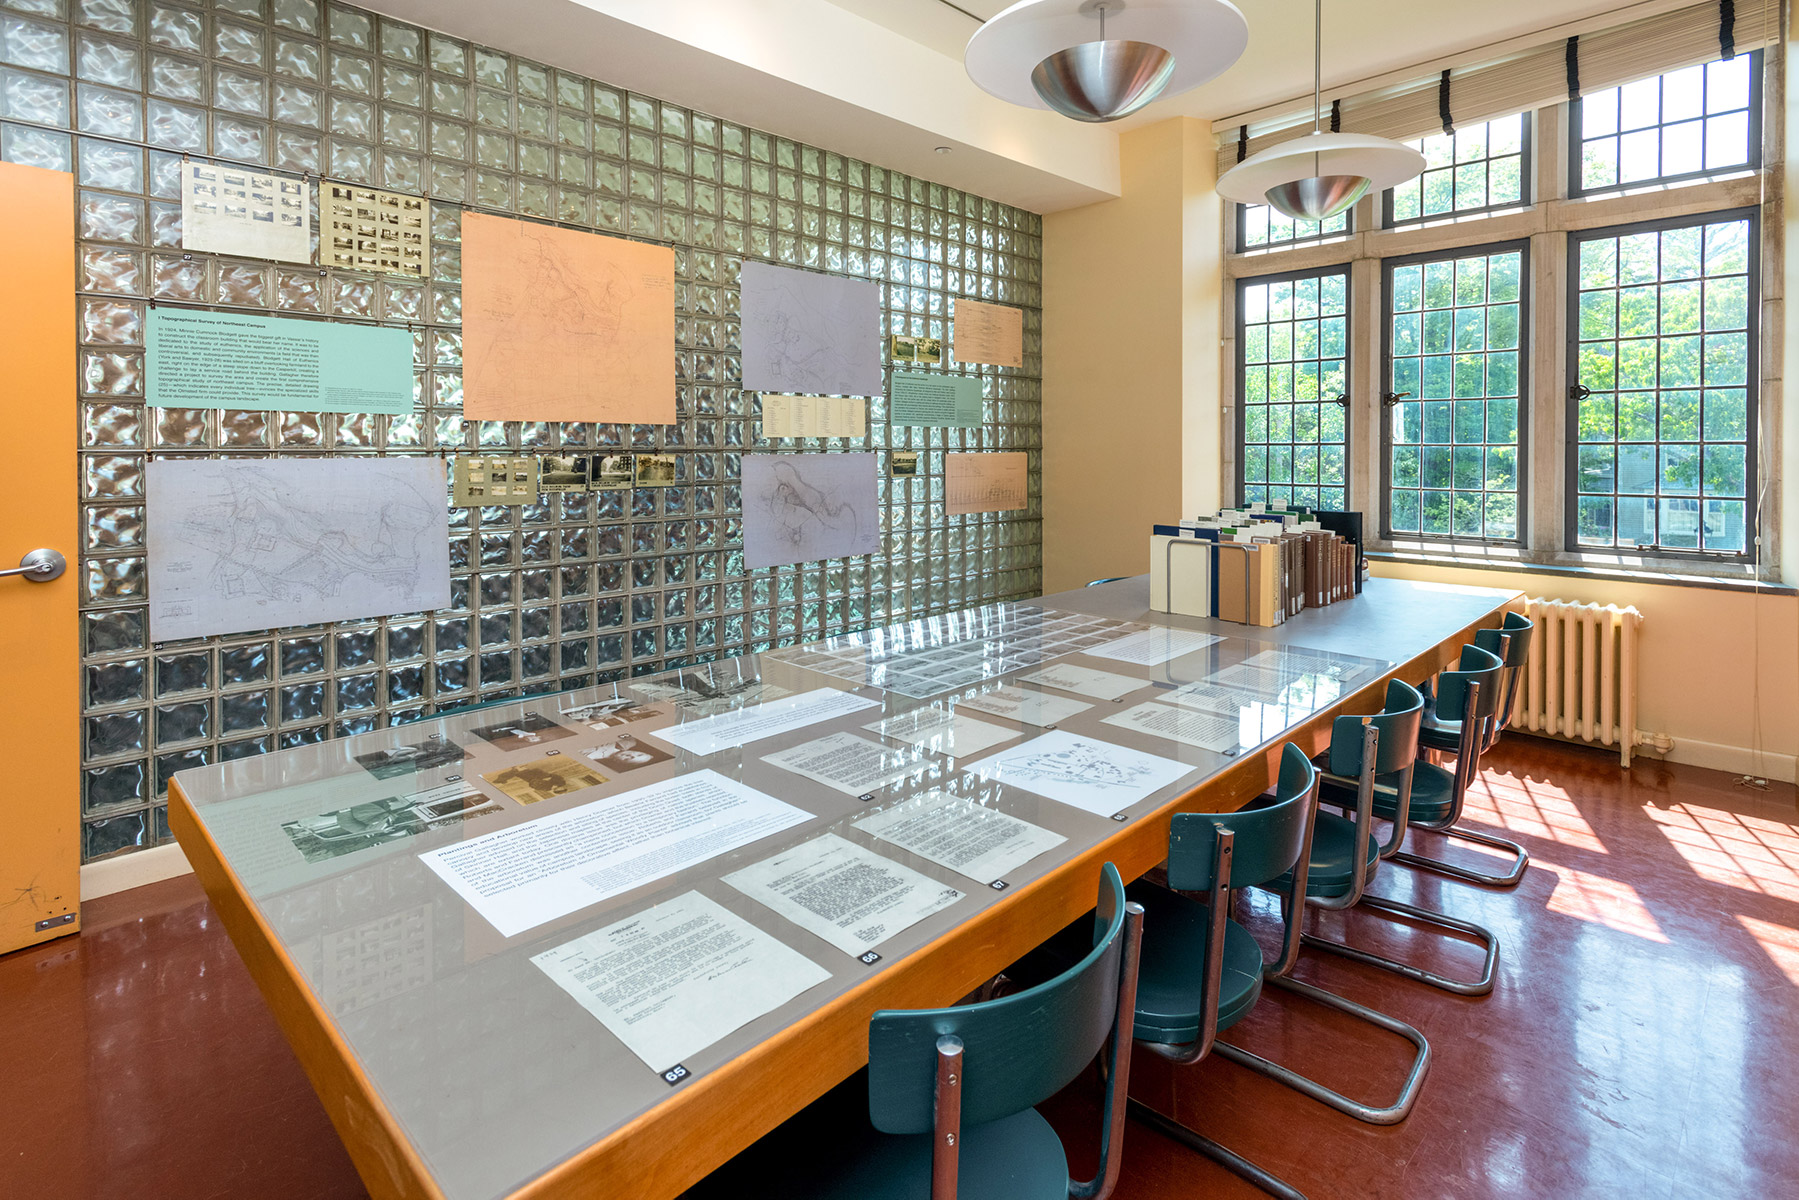 From the Main Room of the Art Library, the exhibition continues in reading room AL2, where the walls were originally designed with built-in hardware for hanging study images. The table is transformed into a vitrine, as well as housing select readings on the Olmsteds and American landscape architecture.